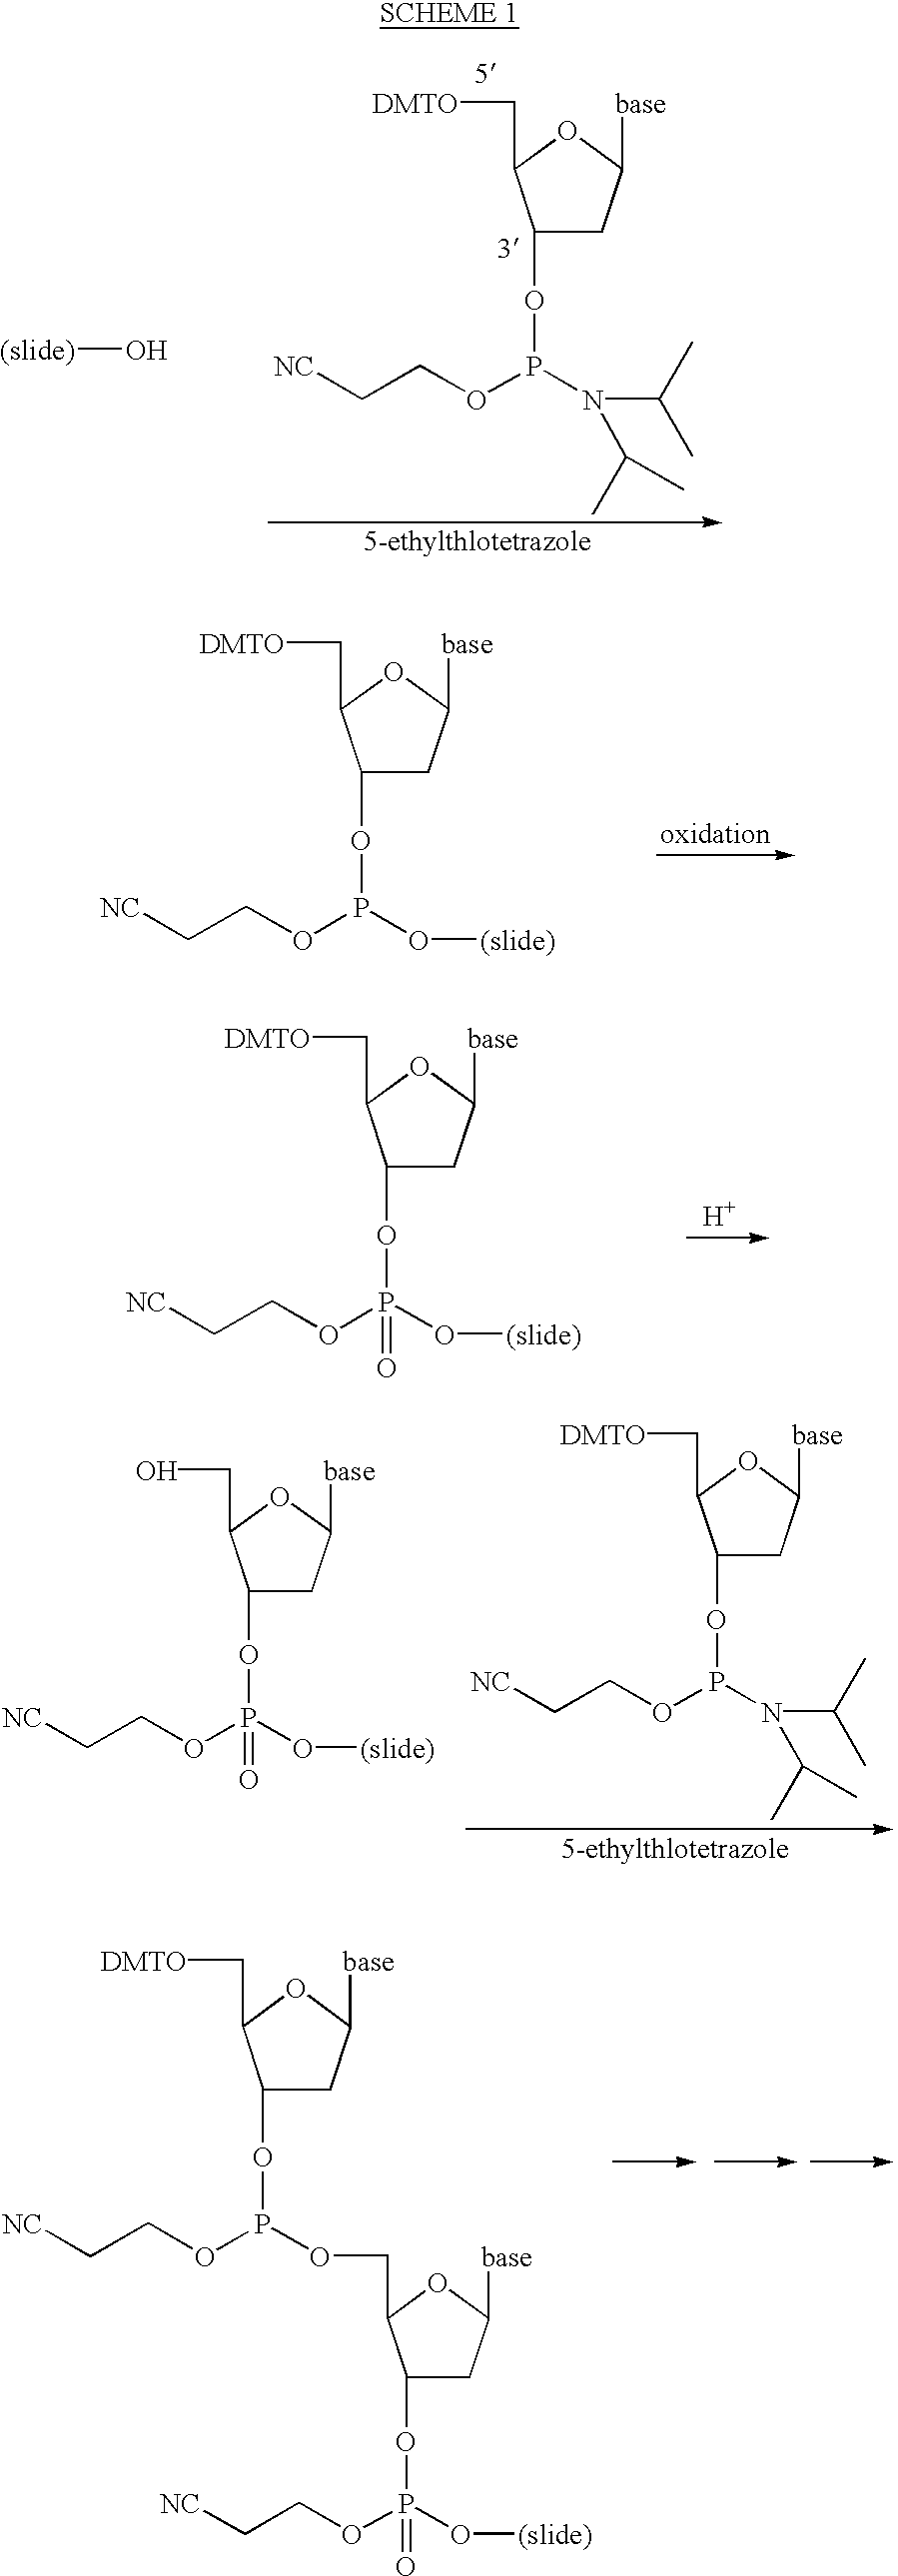 Chemical synthesis using solvent microdroplets